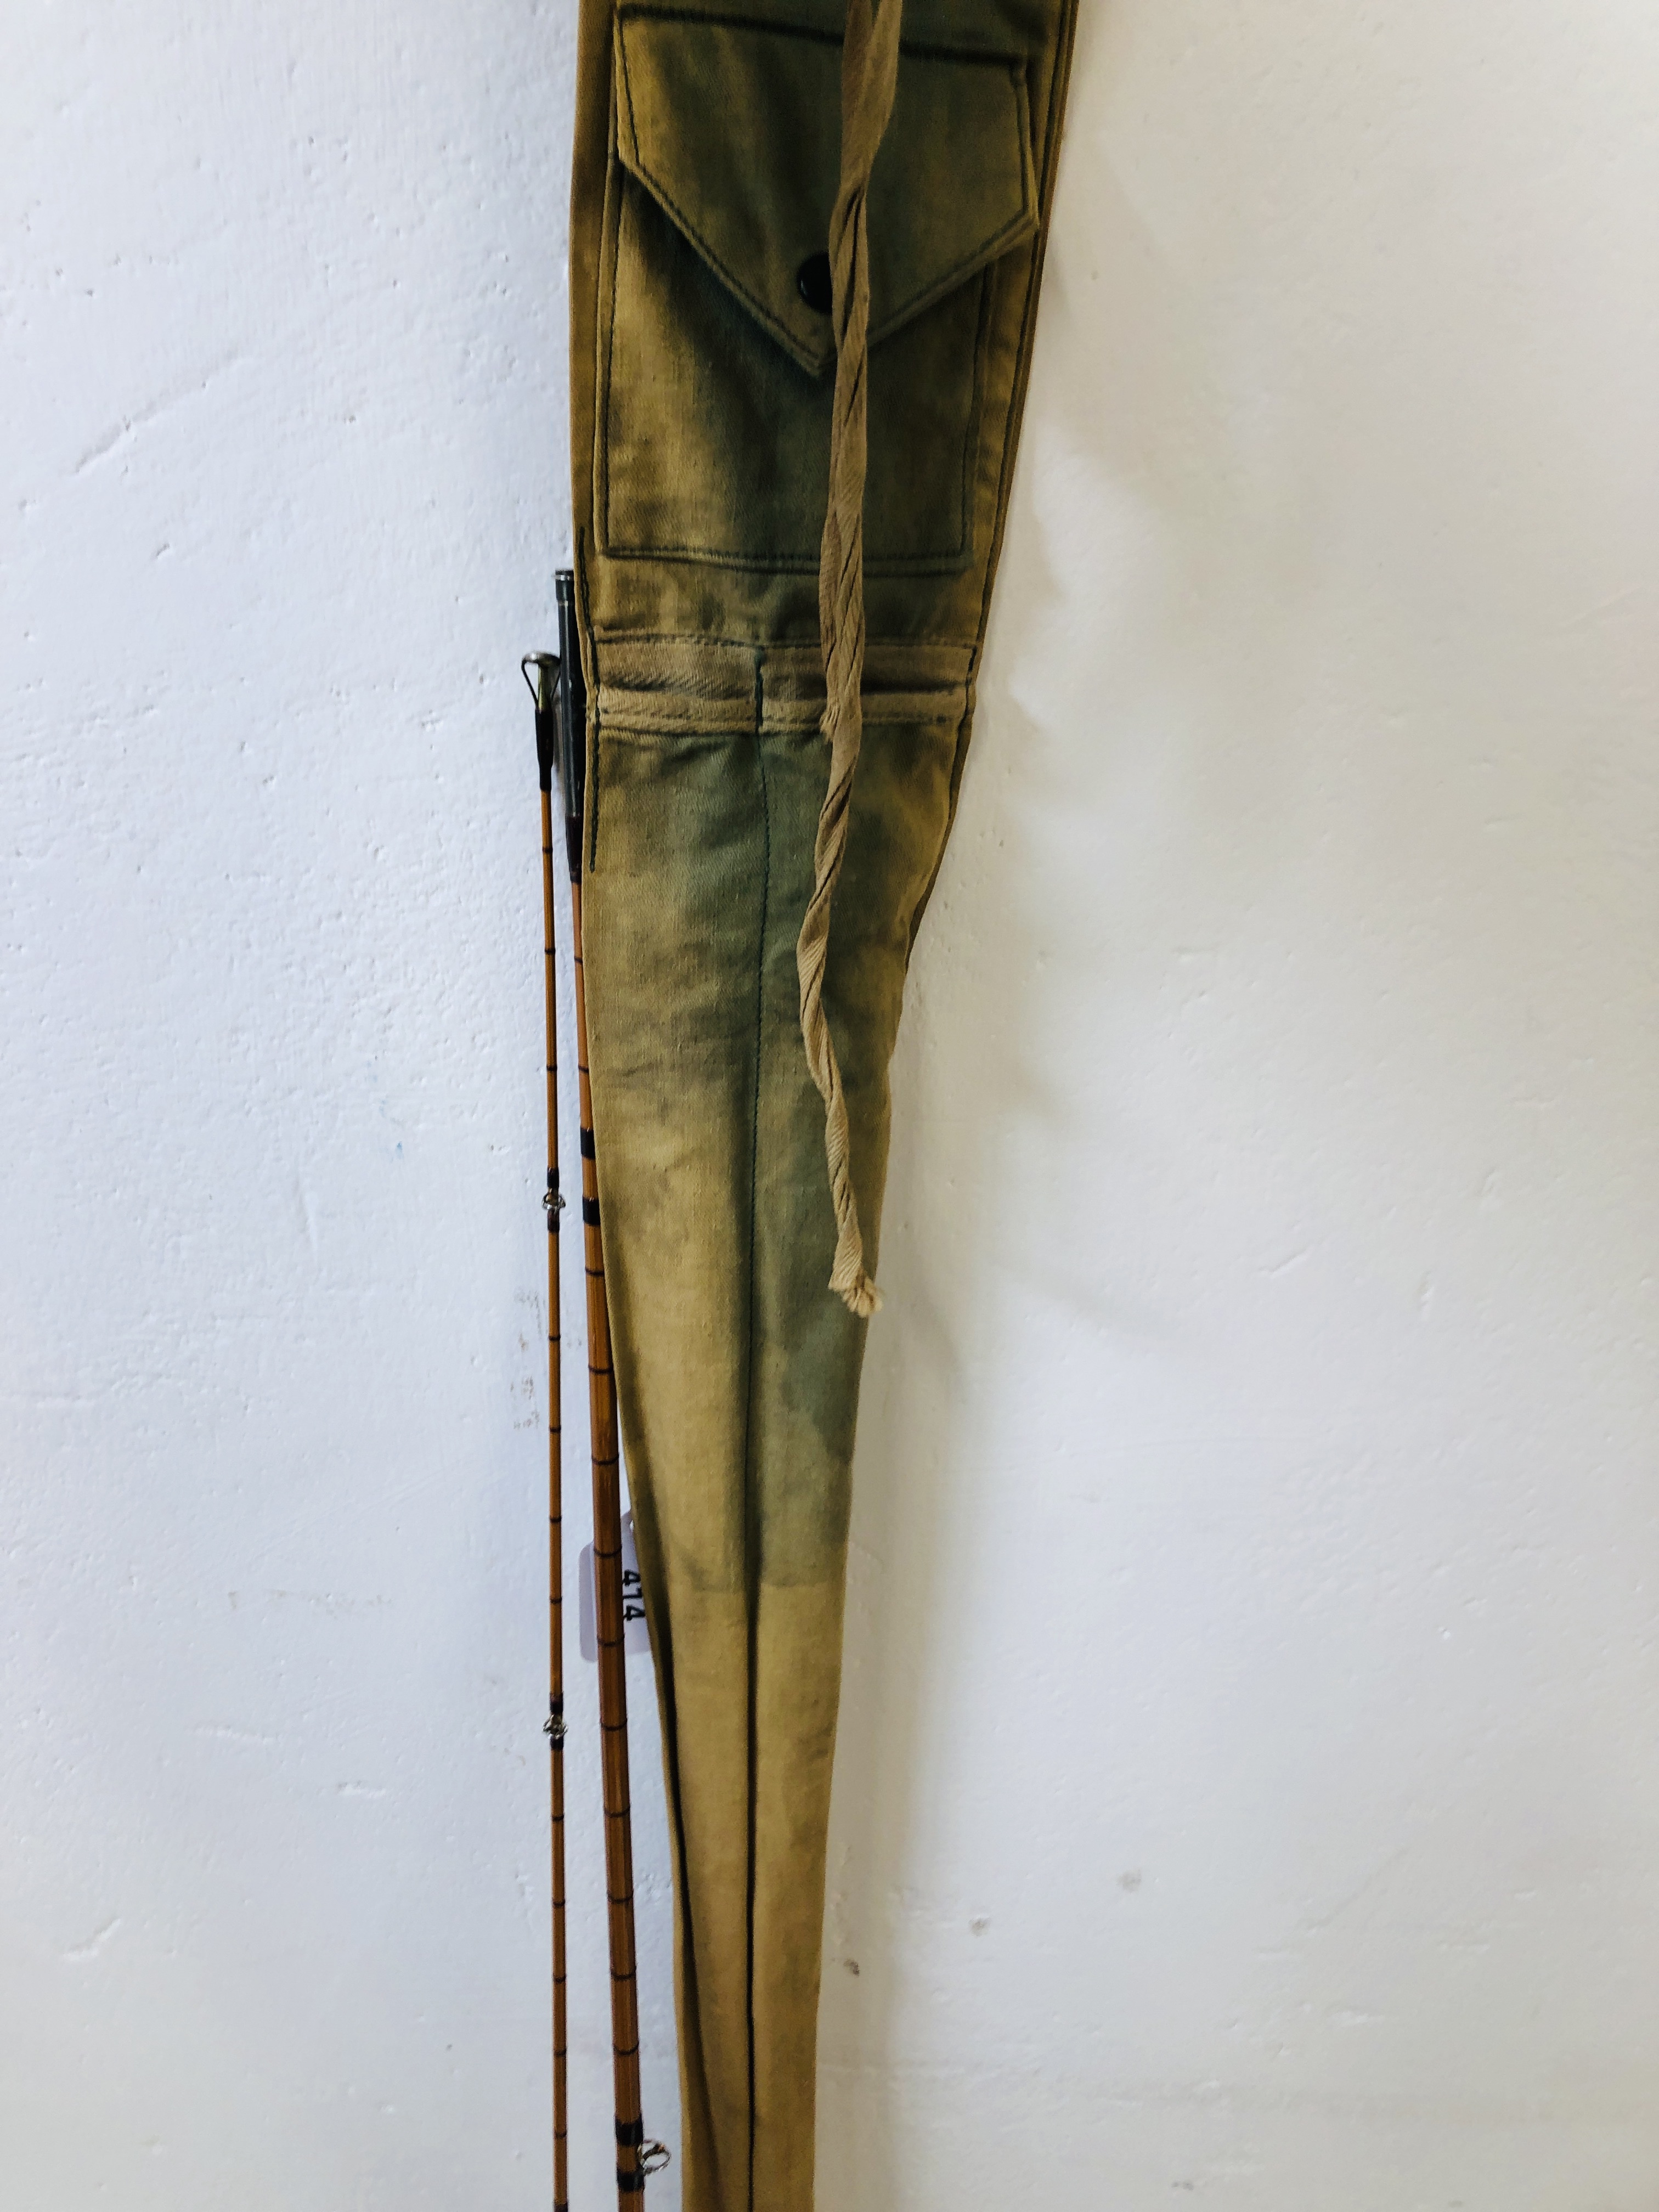 A HARDY "THE PERFECTION" TWO PIECE SPLIT CANE FISHING ROD IN BAG - Image 8 of 9